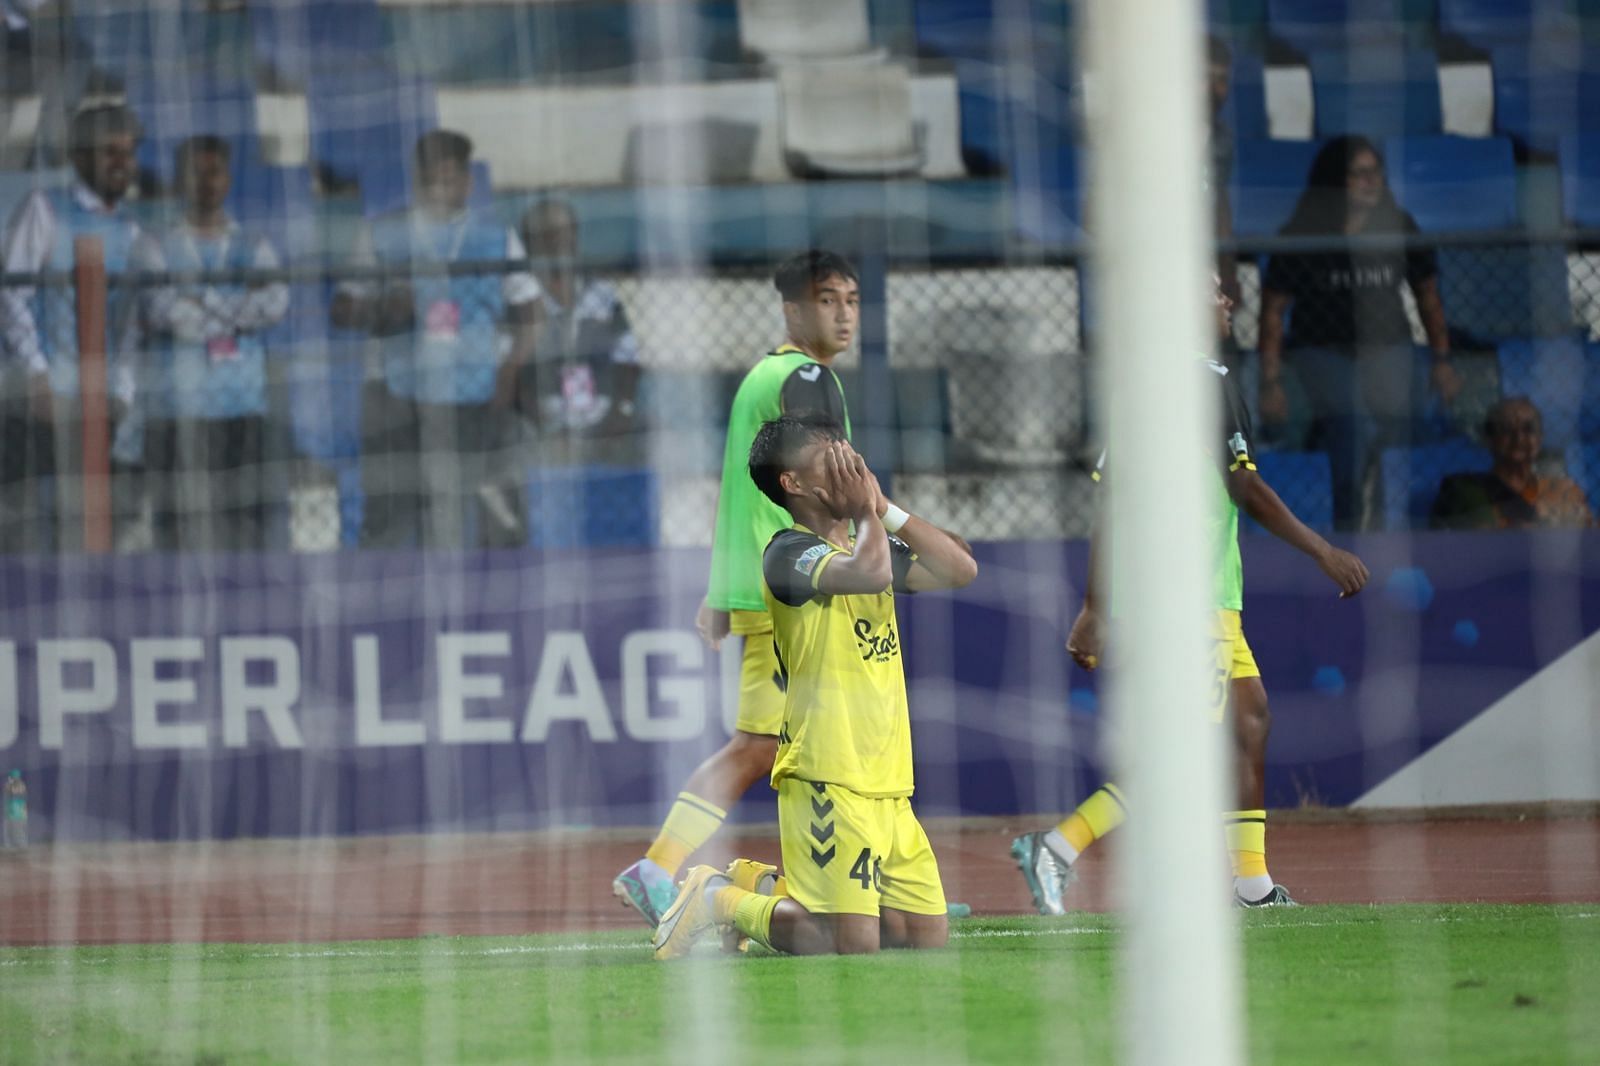 Chhunga sank to the ground in thanks after scoring his first ISL goal against Bengaluru FC on Saturday, [Hyd FC]